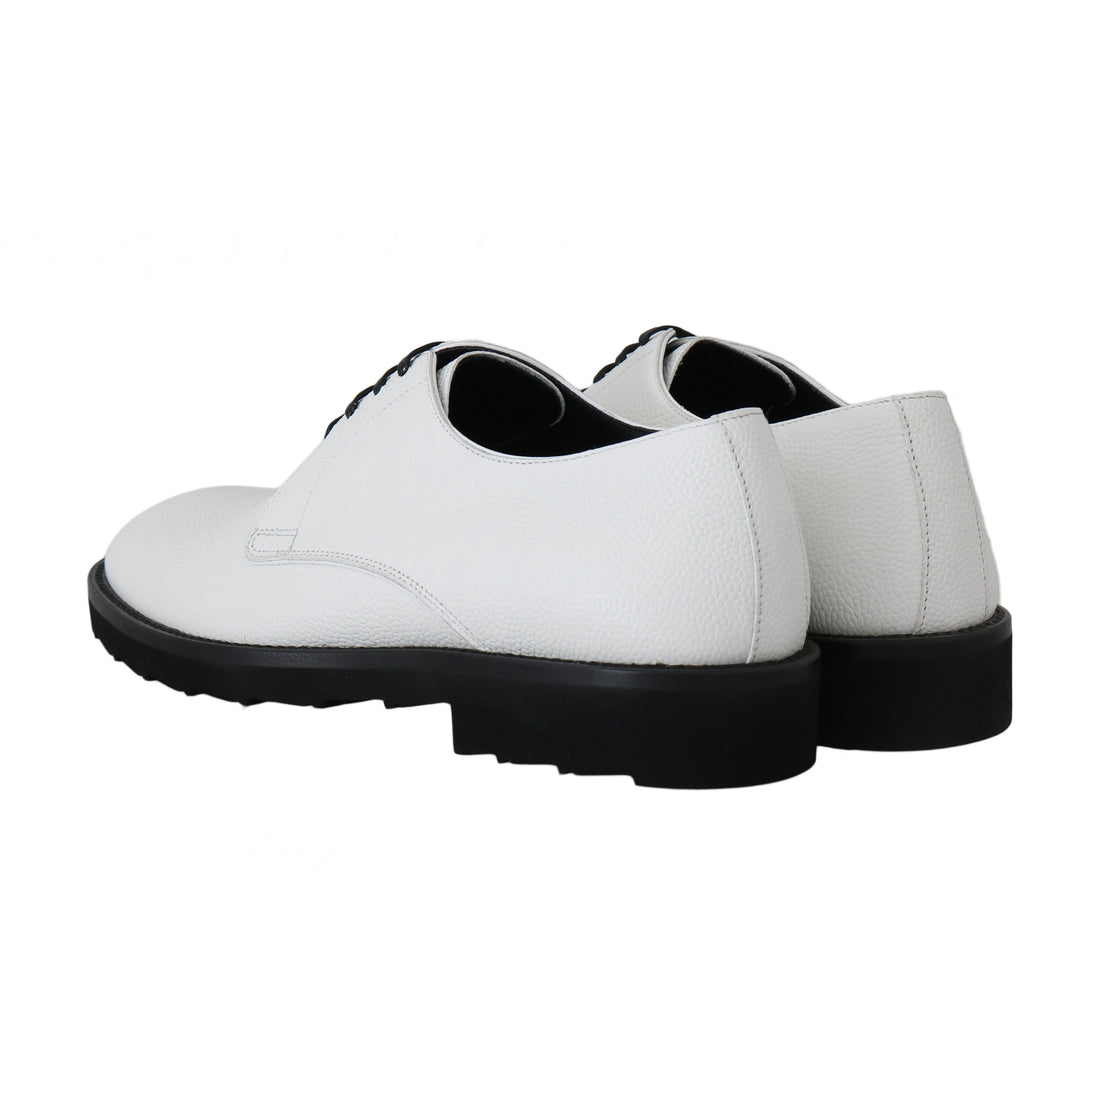 Dolce & Gabbana White Leather Derby Dress Formal Shoes - Paris Deluxe